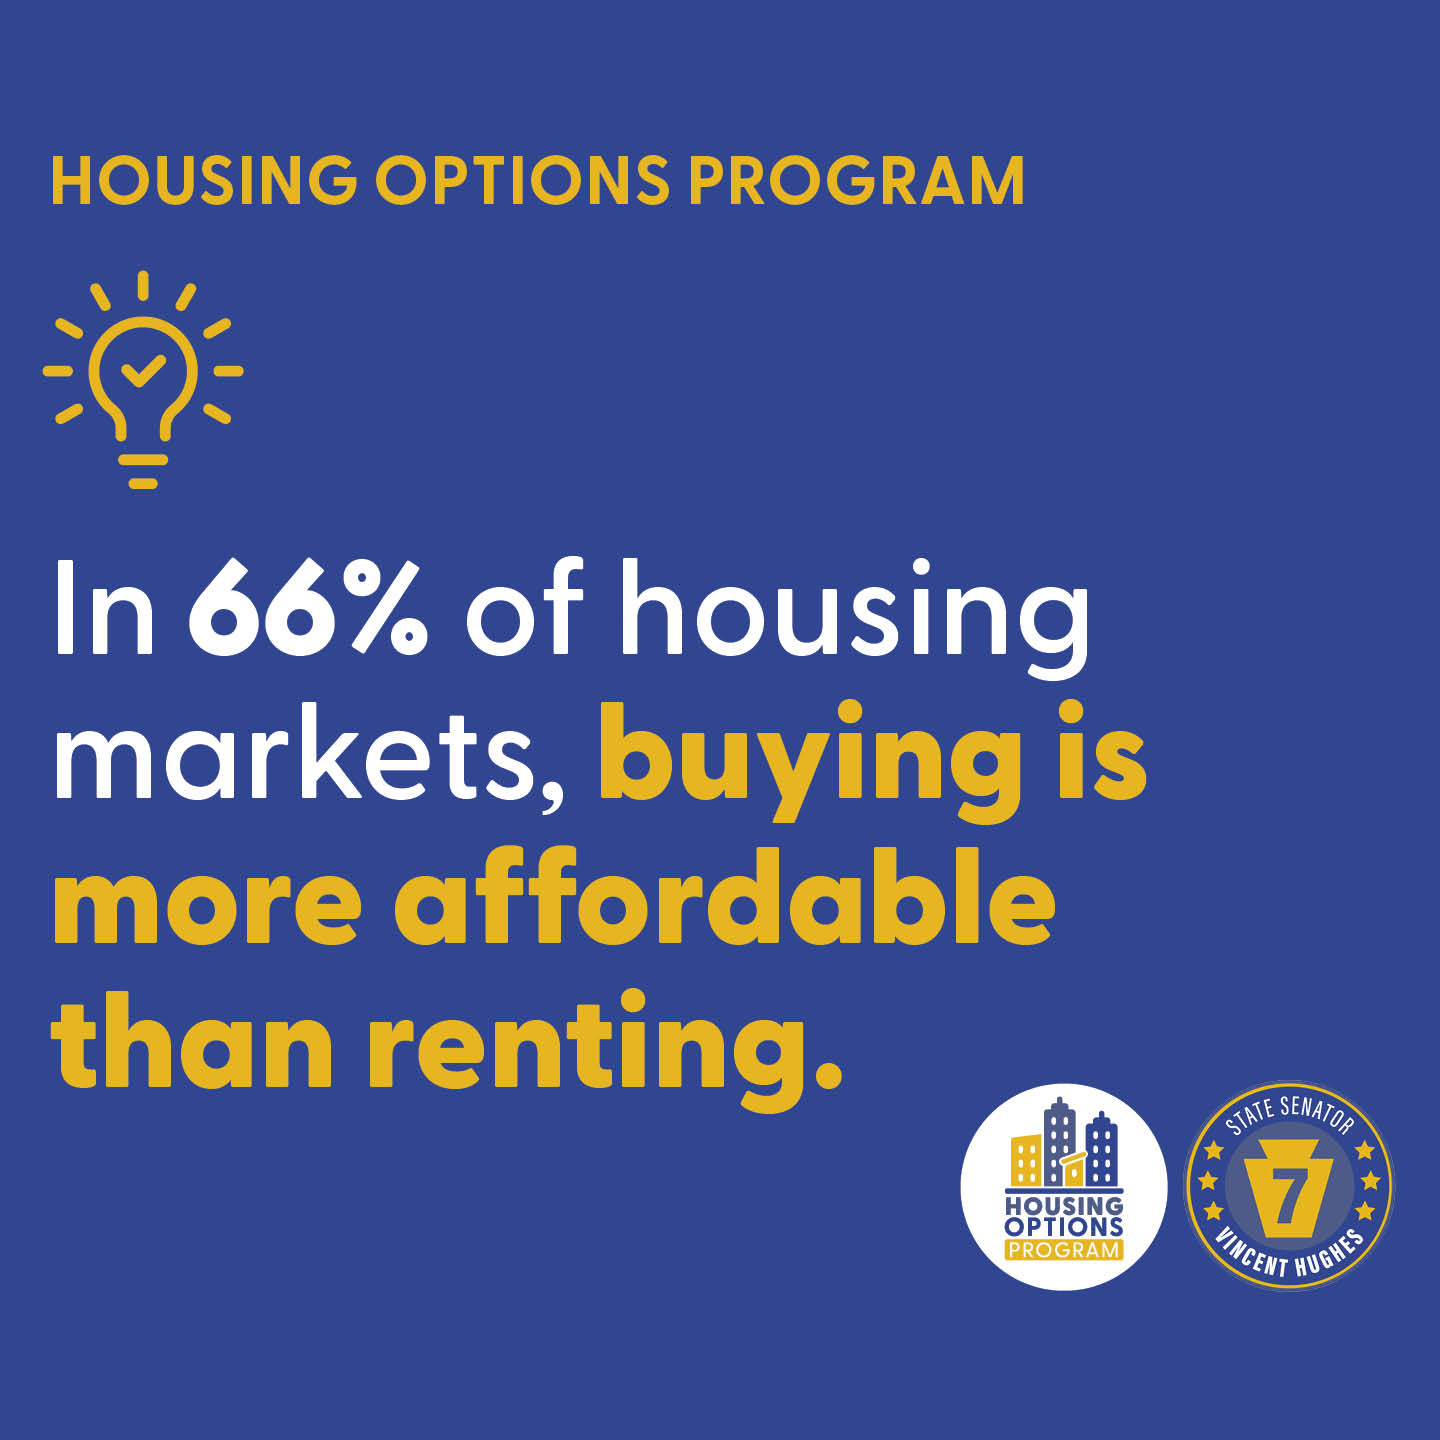 HOUSING OPTIONS PROGRAM - In 66% of housing markets, buying is more affordable than renting.